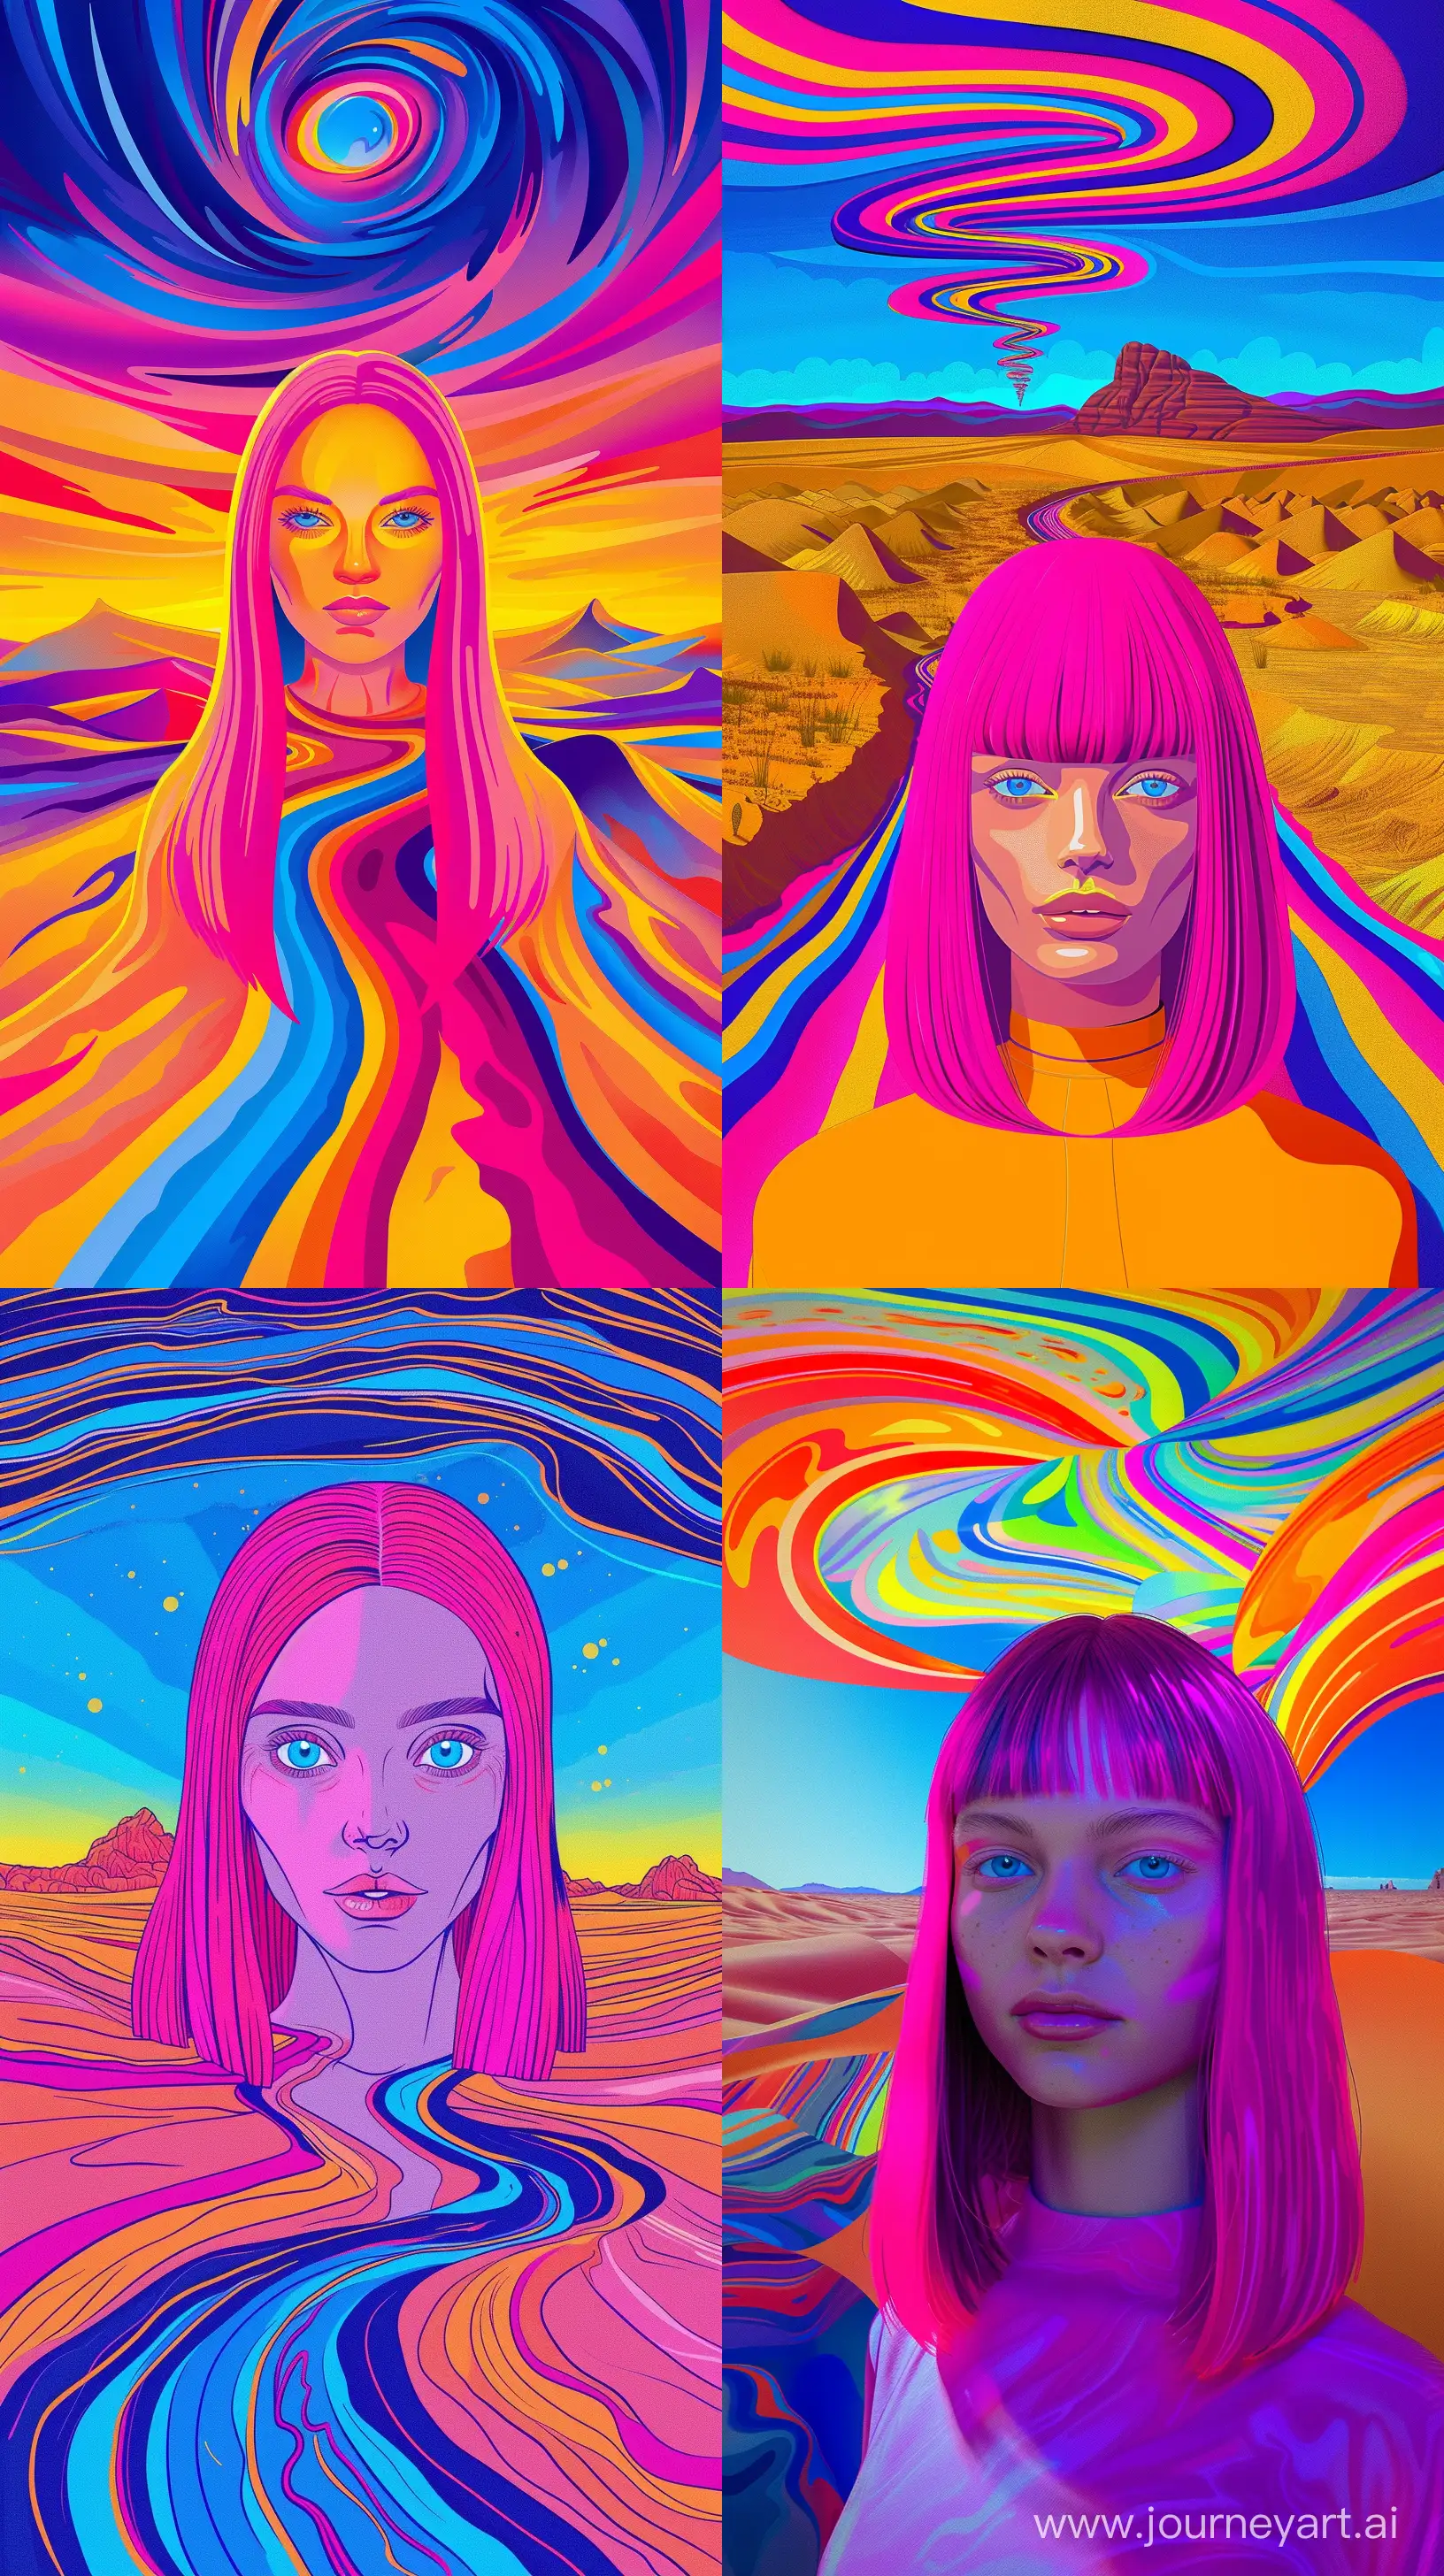 Hyperintense colorblast the complexity and interconnectedness of the Desert after Rain,Morning,Golden hour, with a supermodel girl, neon fuchsia straight shoulder length hair, blue eyes, symmetrical face, vibrant and swirling lines representing the landscape. The colors used are bold and saturated, evoking a sense of energy and vitality. Art Form/Style: Digital illustration with abstract and surreal elements, using bold and contrasting colors to create visual impact. Artist References: Georgia o'keeffe --ar 9:16 --v 6